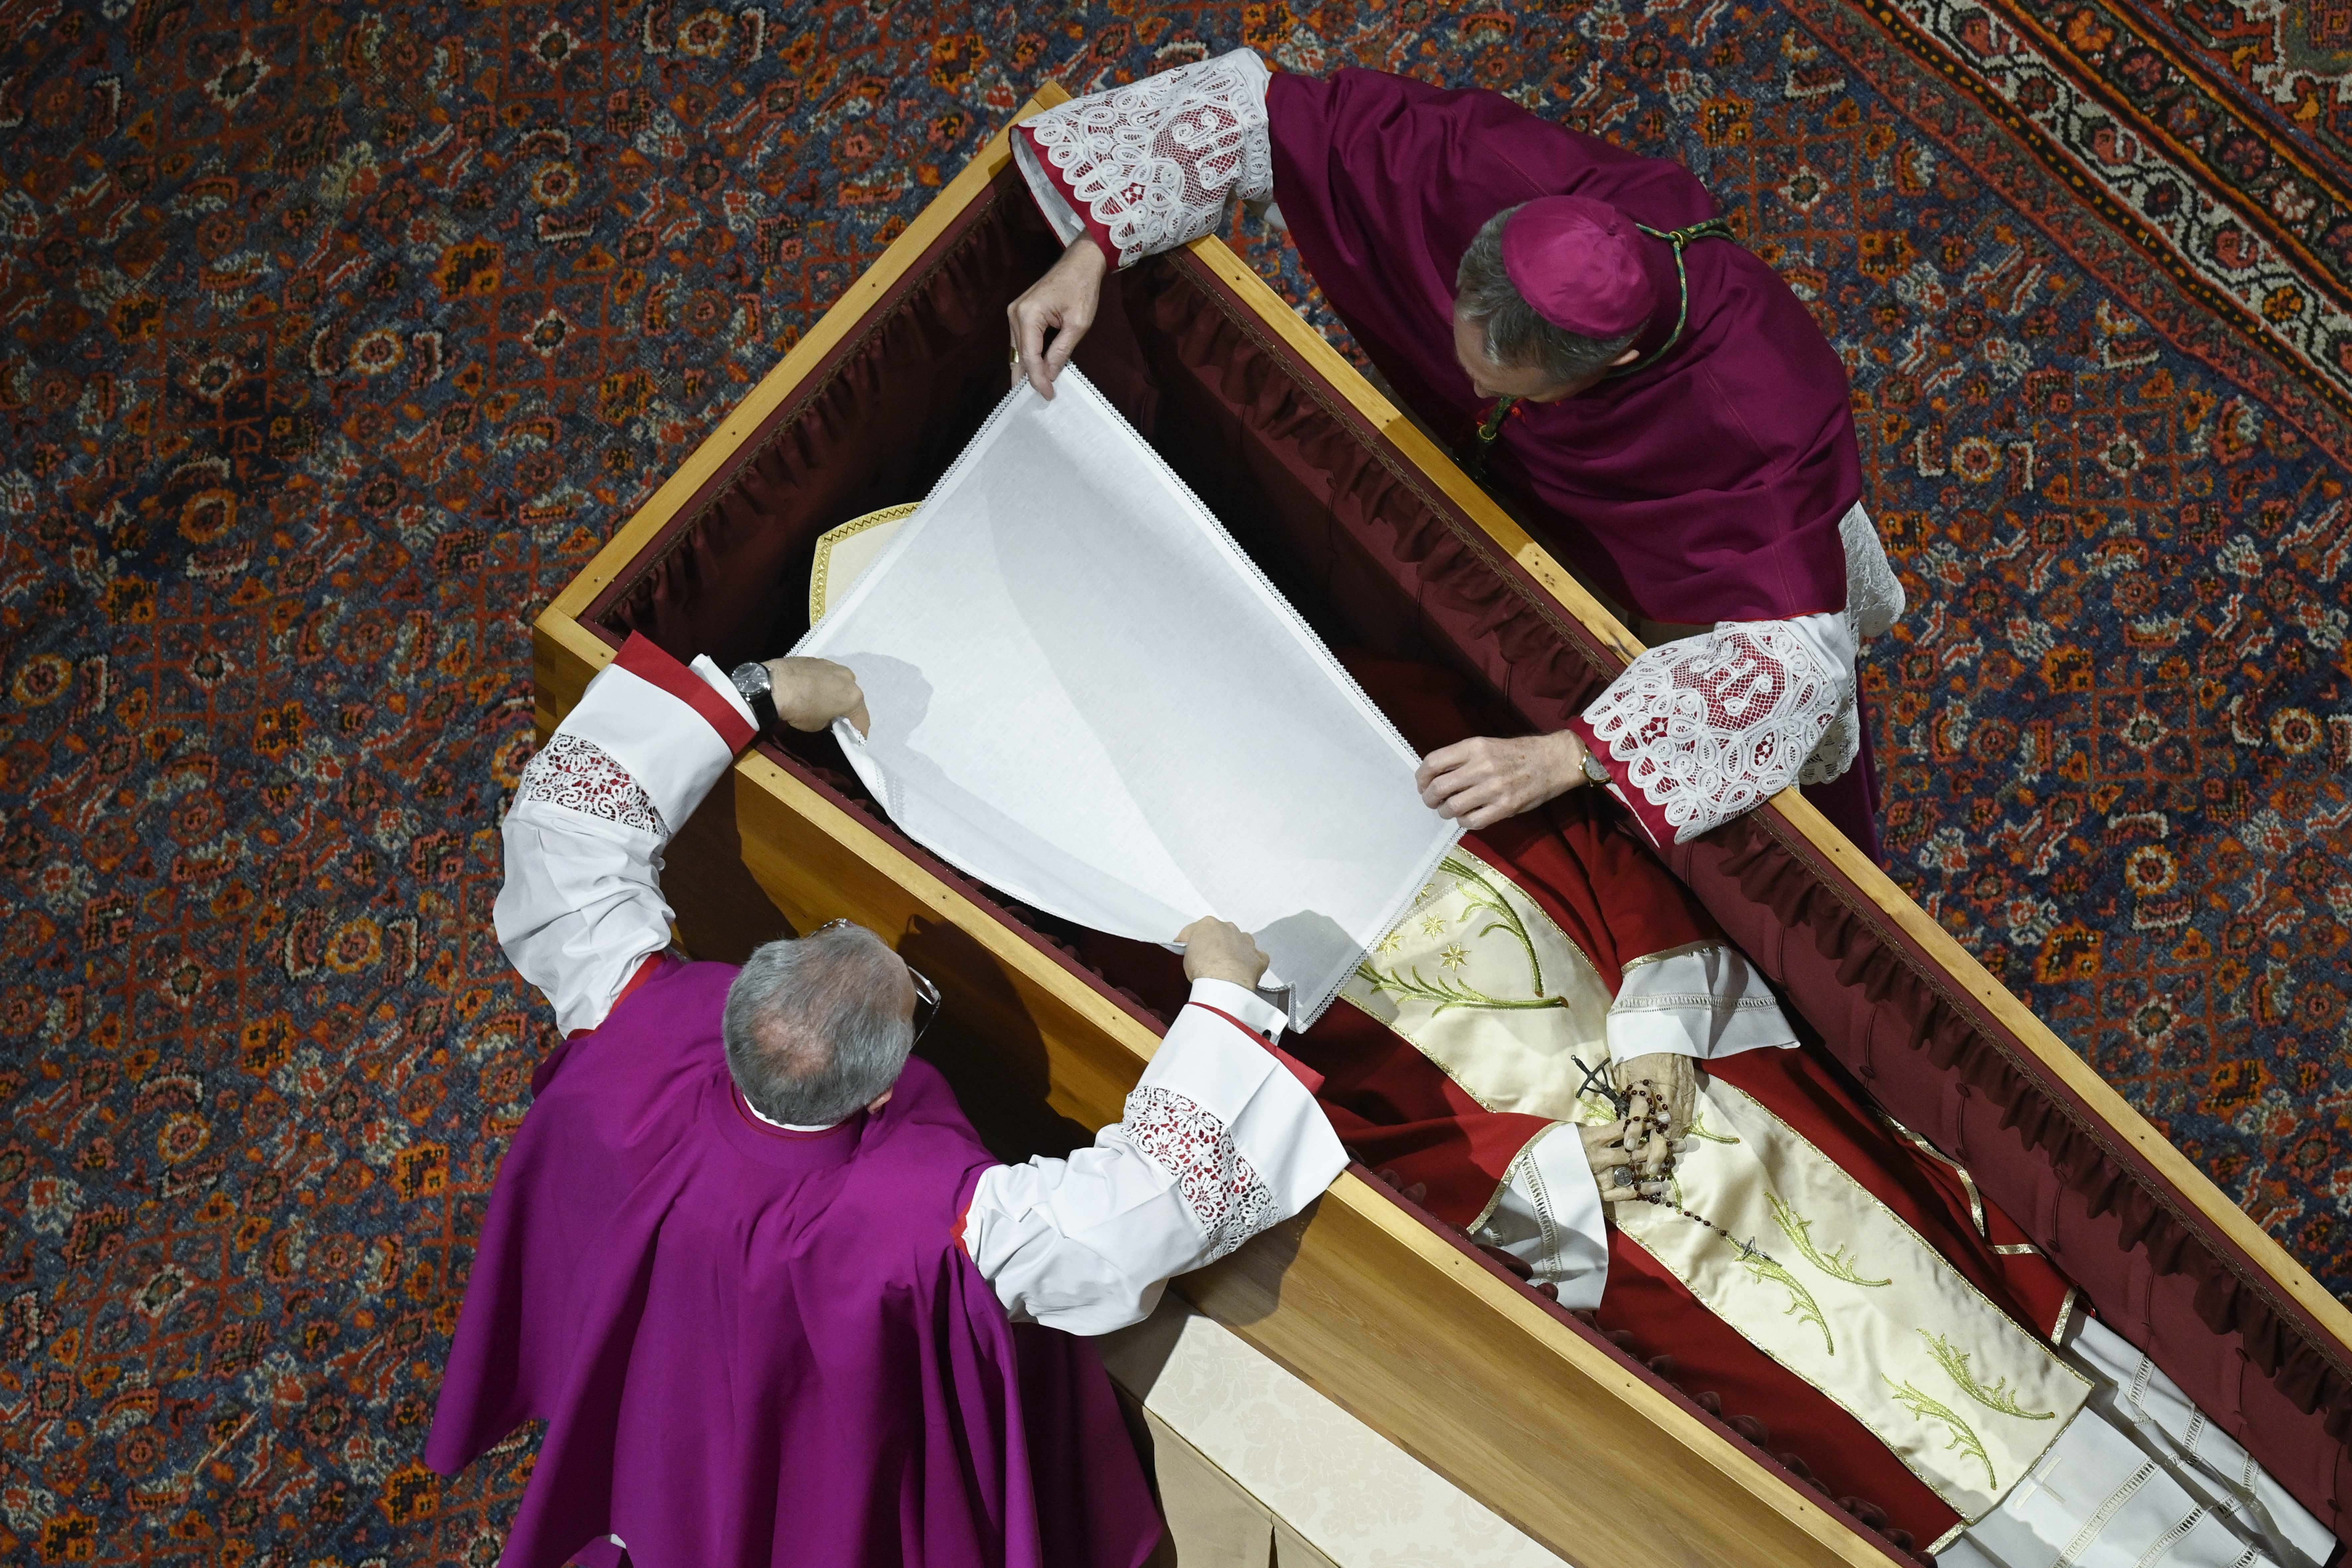 The face of Pope Benedict XVI's body is covered. 